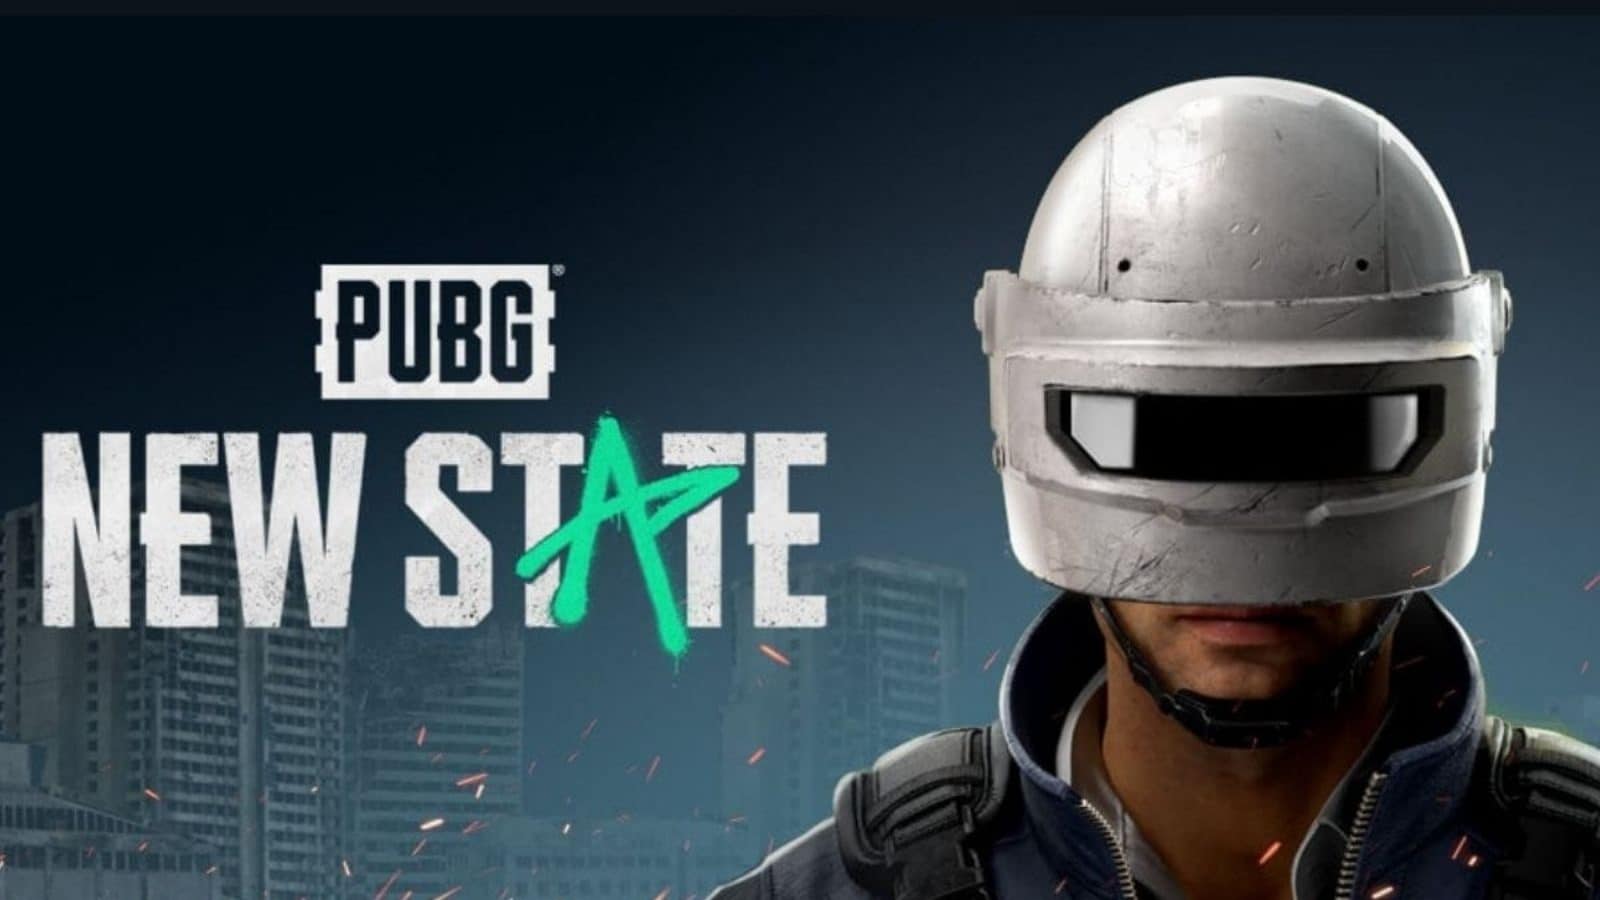 PUBG New State Clocks 1 Crore Downloads on Google Play Three Days After Launch